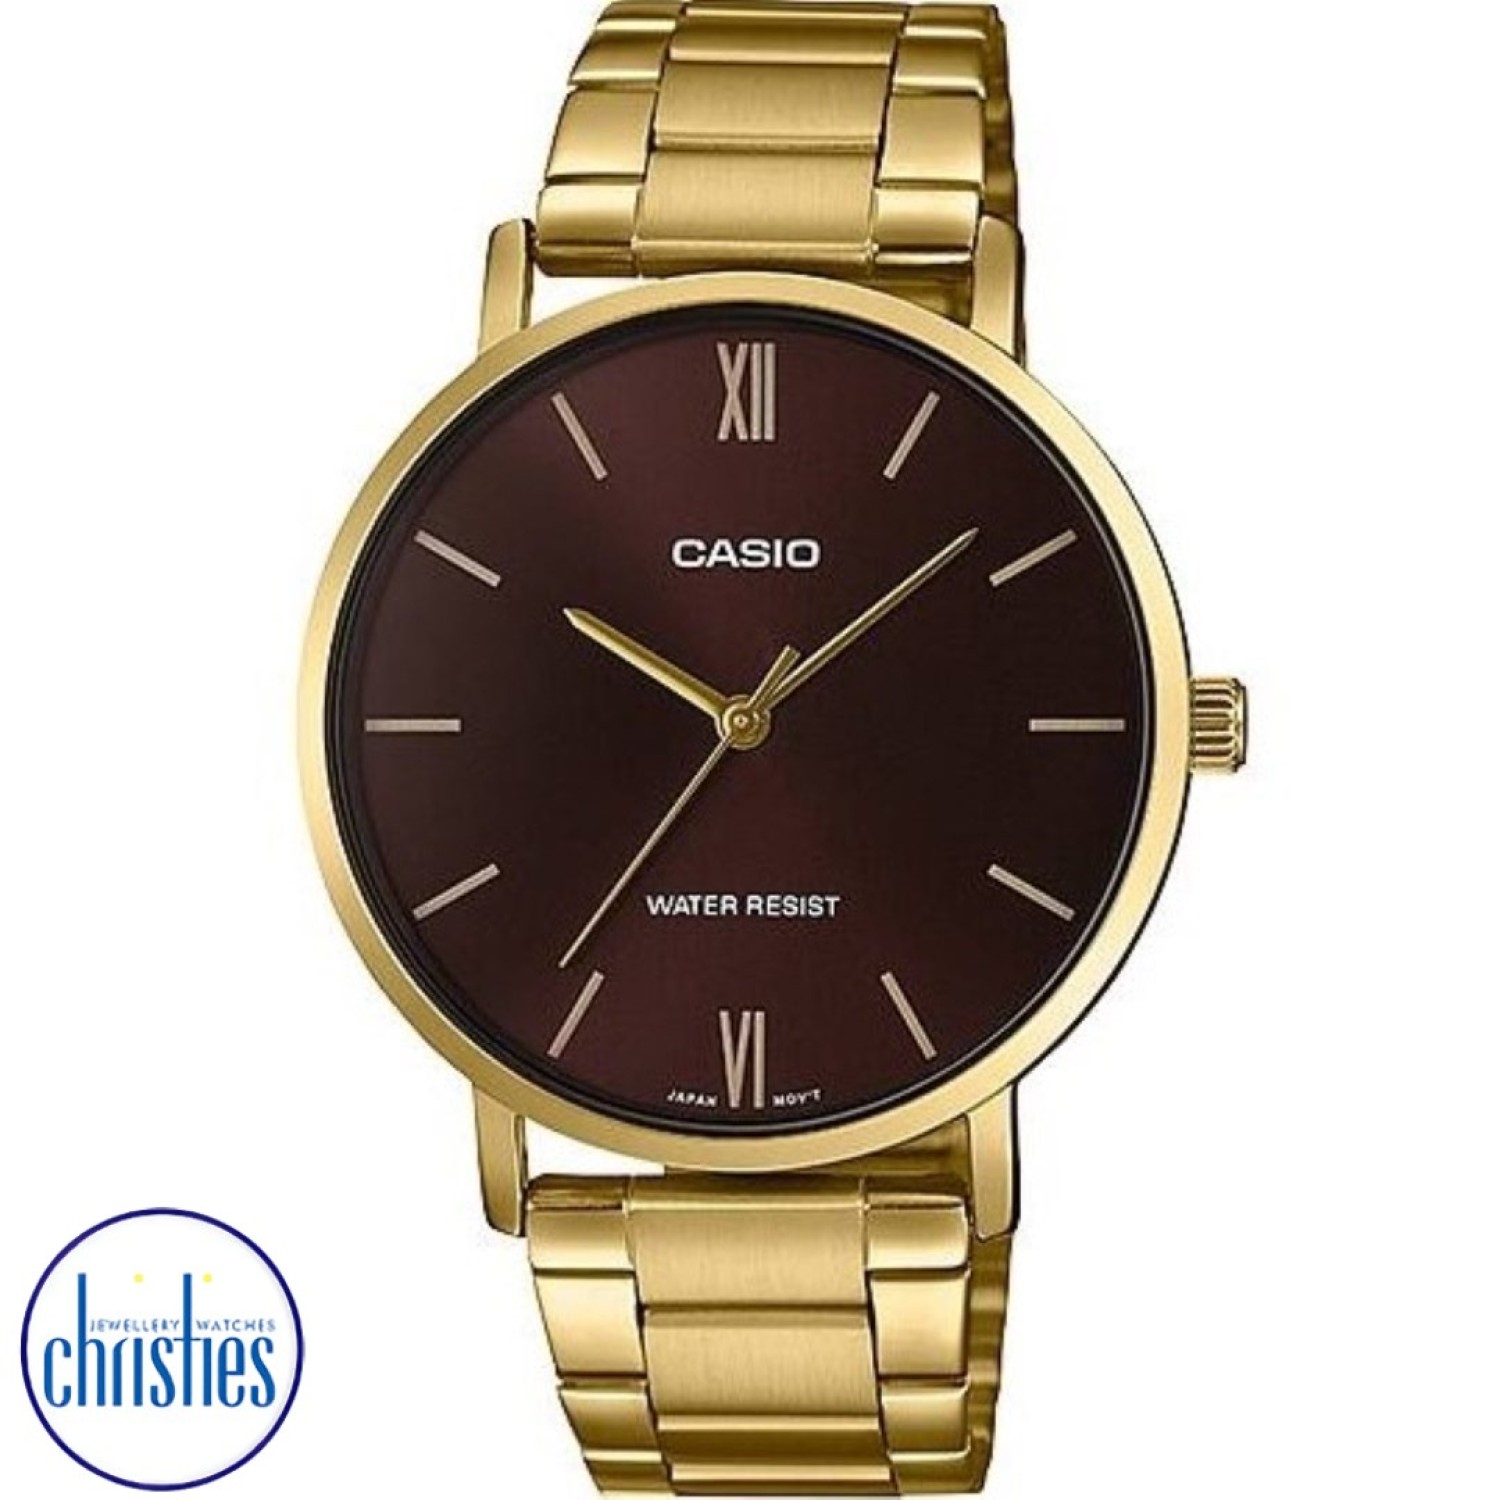 MTPVT01G-5B Casio Gold Dark Brown Dial Watch MTP-VT01G-5B Casio New Zealand and Auckland - Free Delivery - Afterpay, Laybuy and Zip  the easy way to pay - Cheap Casio Watches Auckland